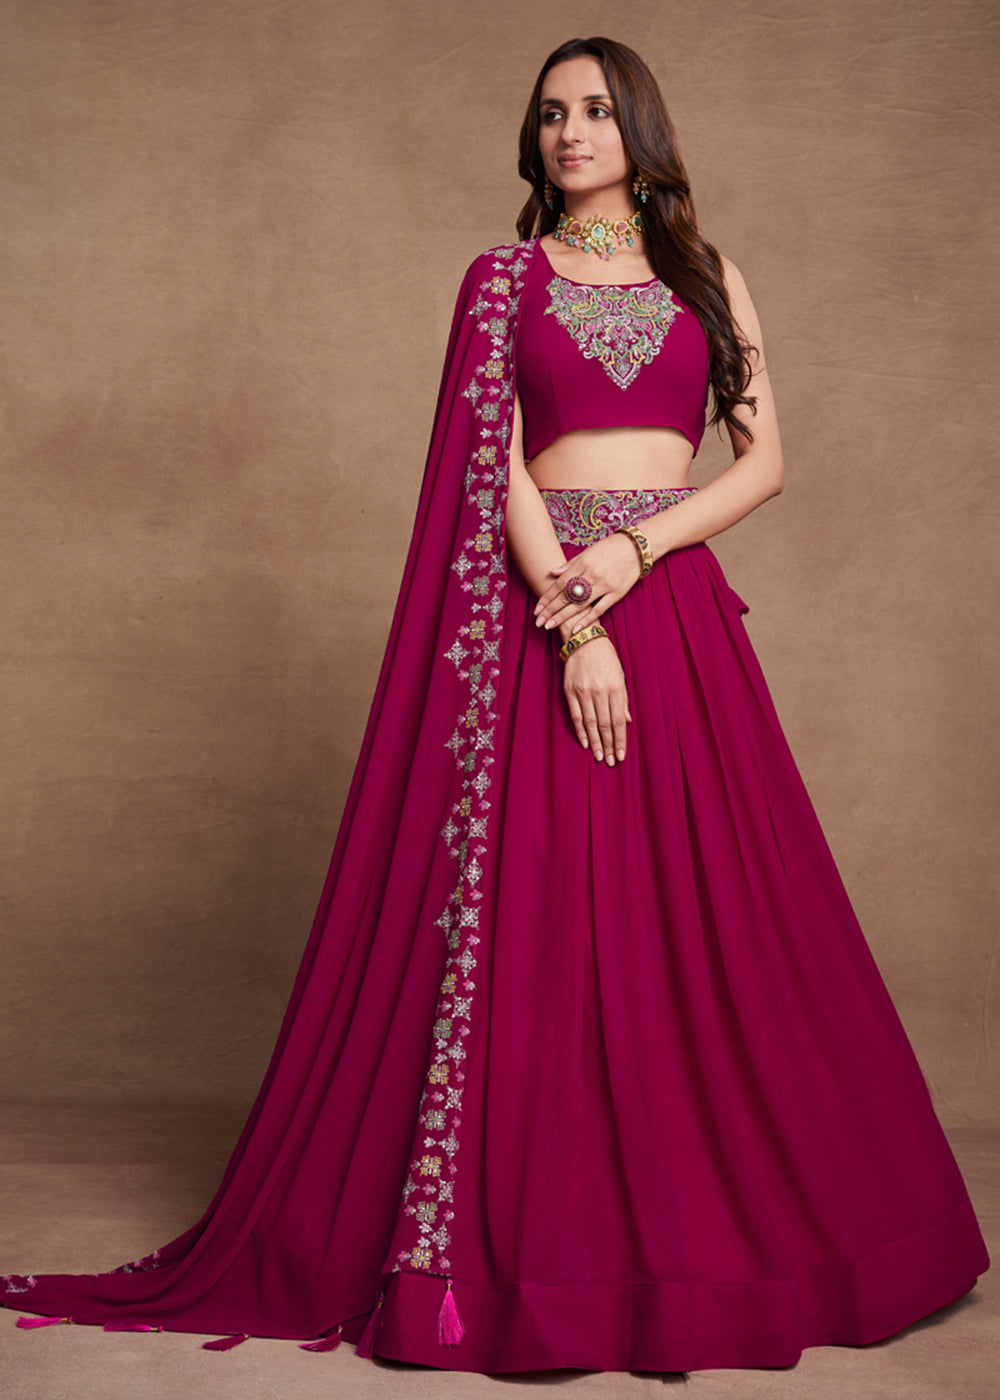 Buy Now Blooming Georgette Pink Embroidered Festive Lehenga Choli Online in USA, UK, Canada & Worldwide at Empress Clothing. 